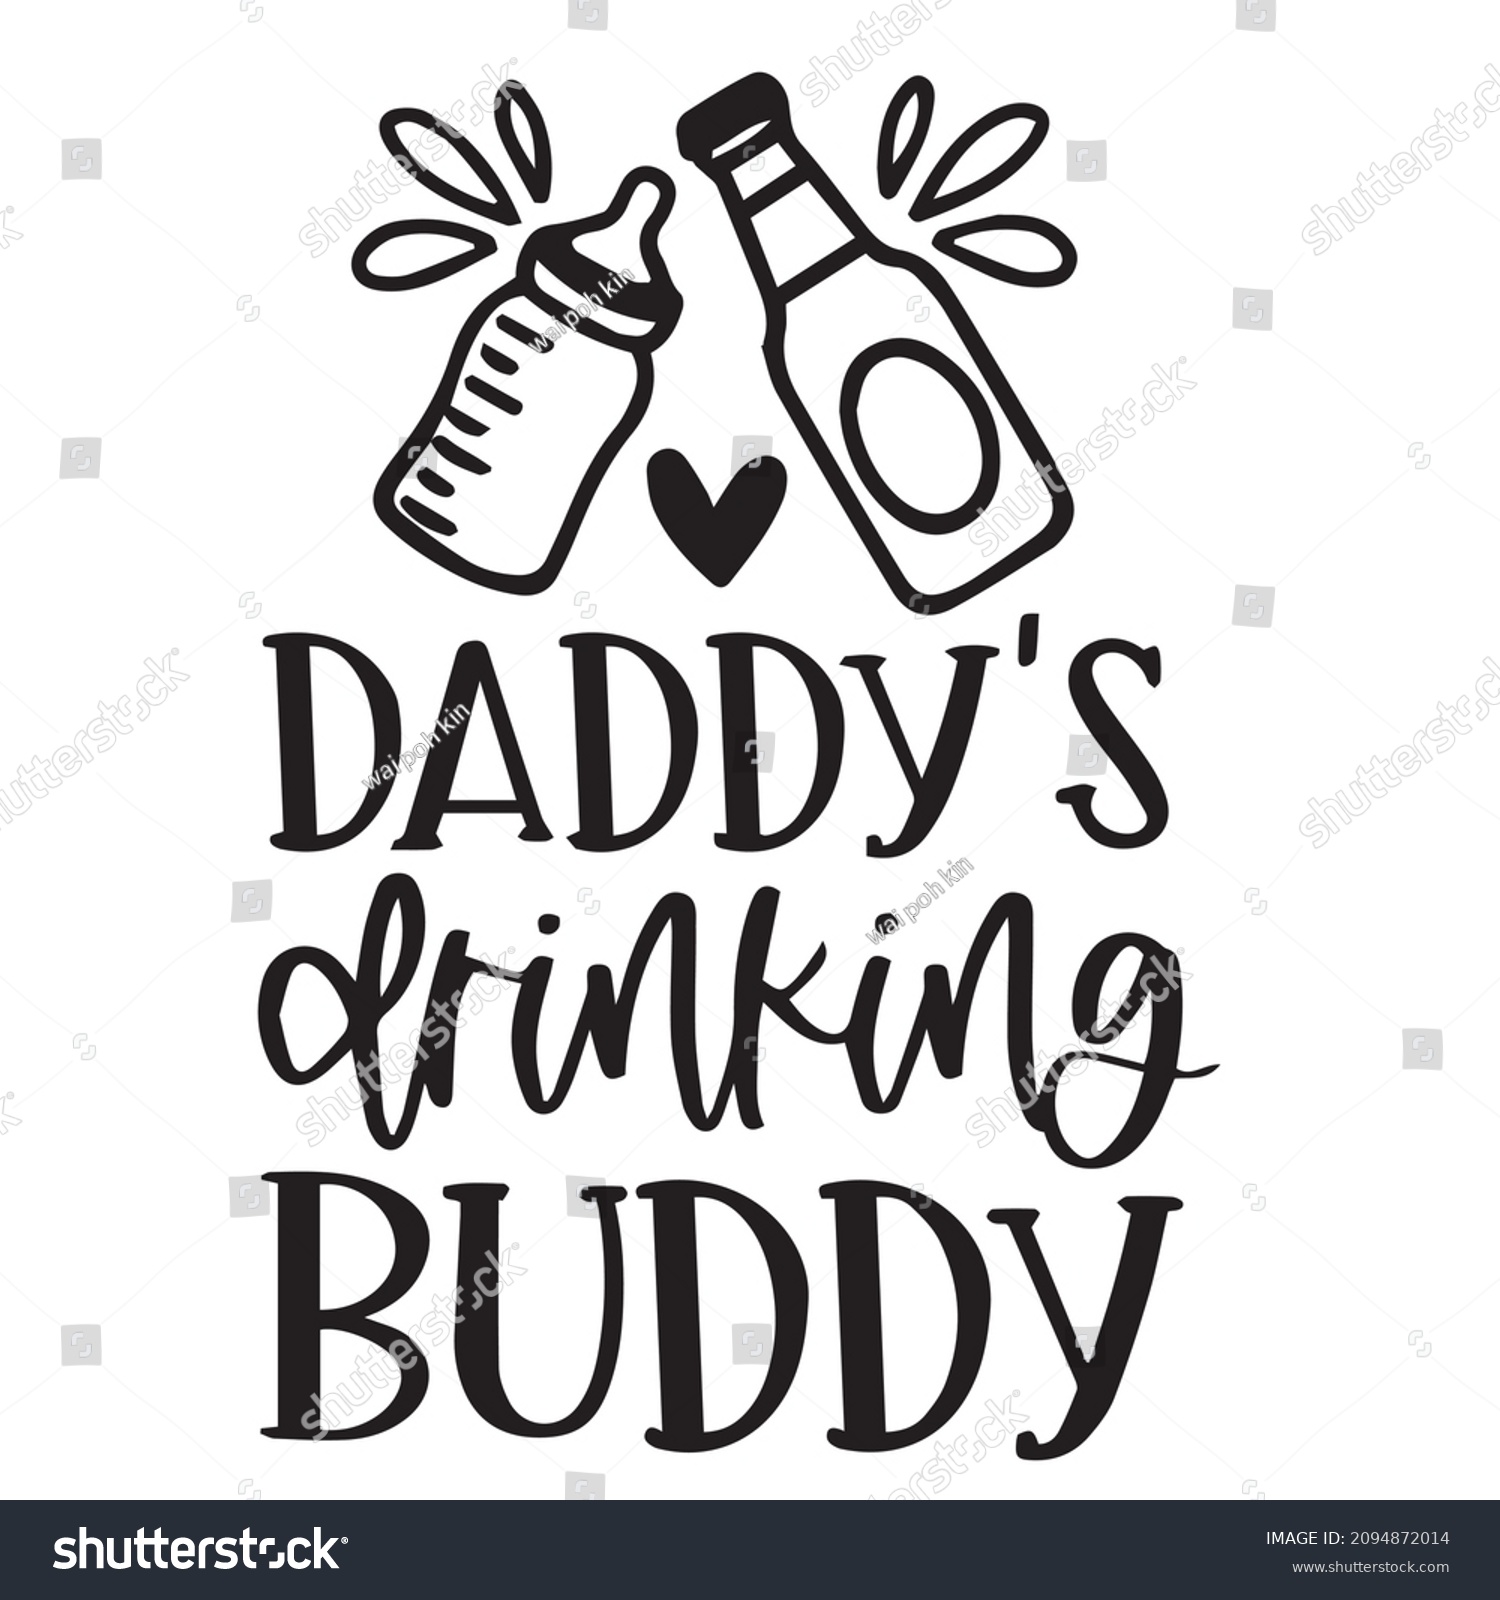 SVG of daddy's drinking buddy logo inspirational quotes typography lettering design svg